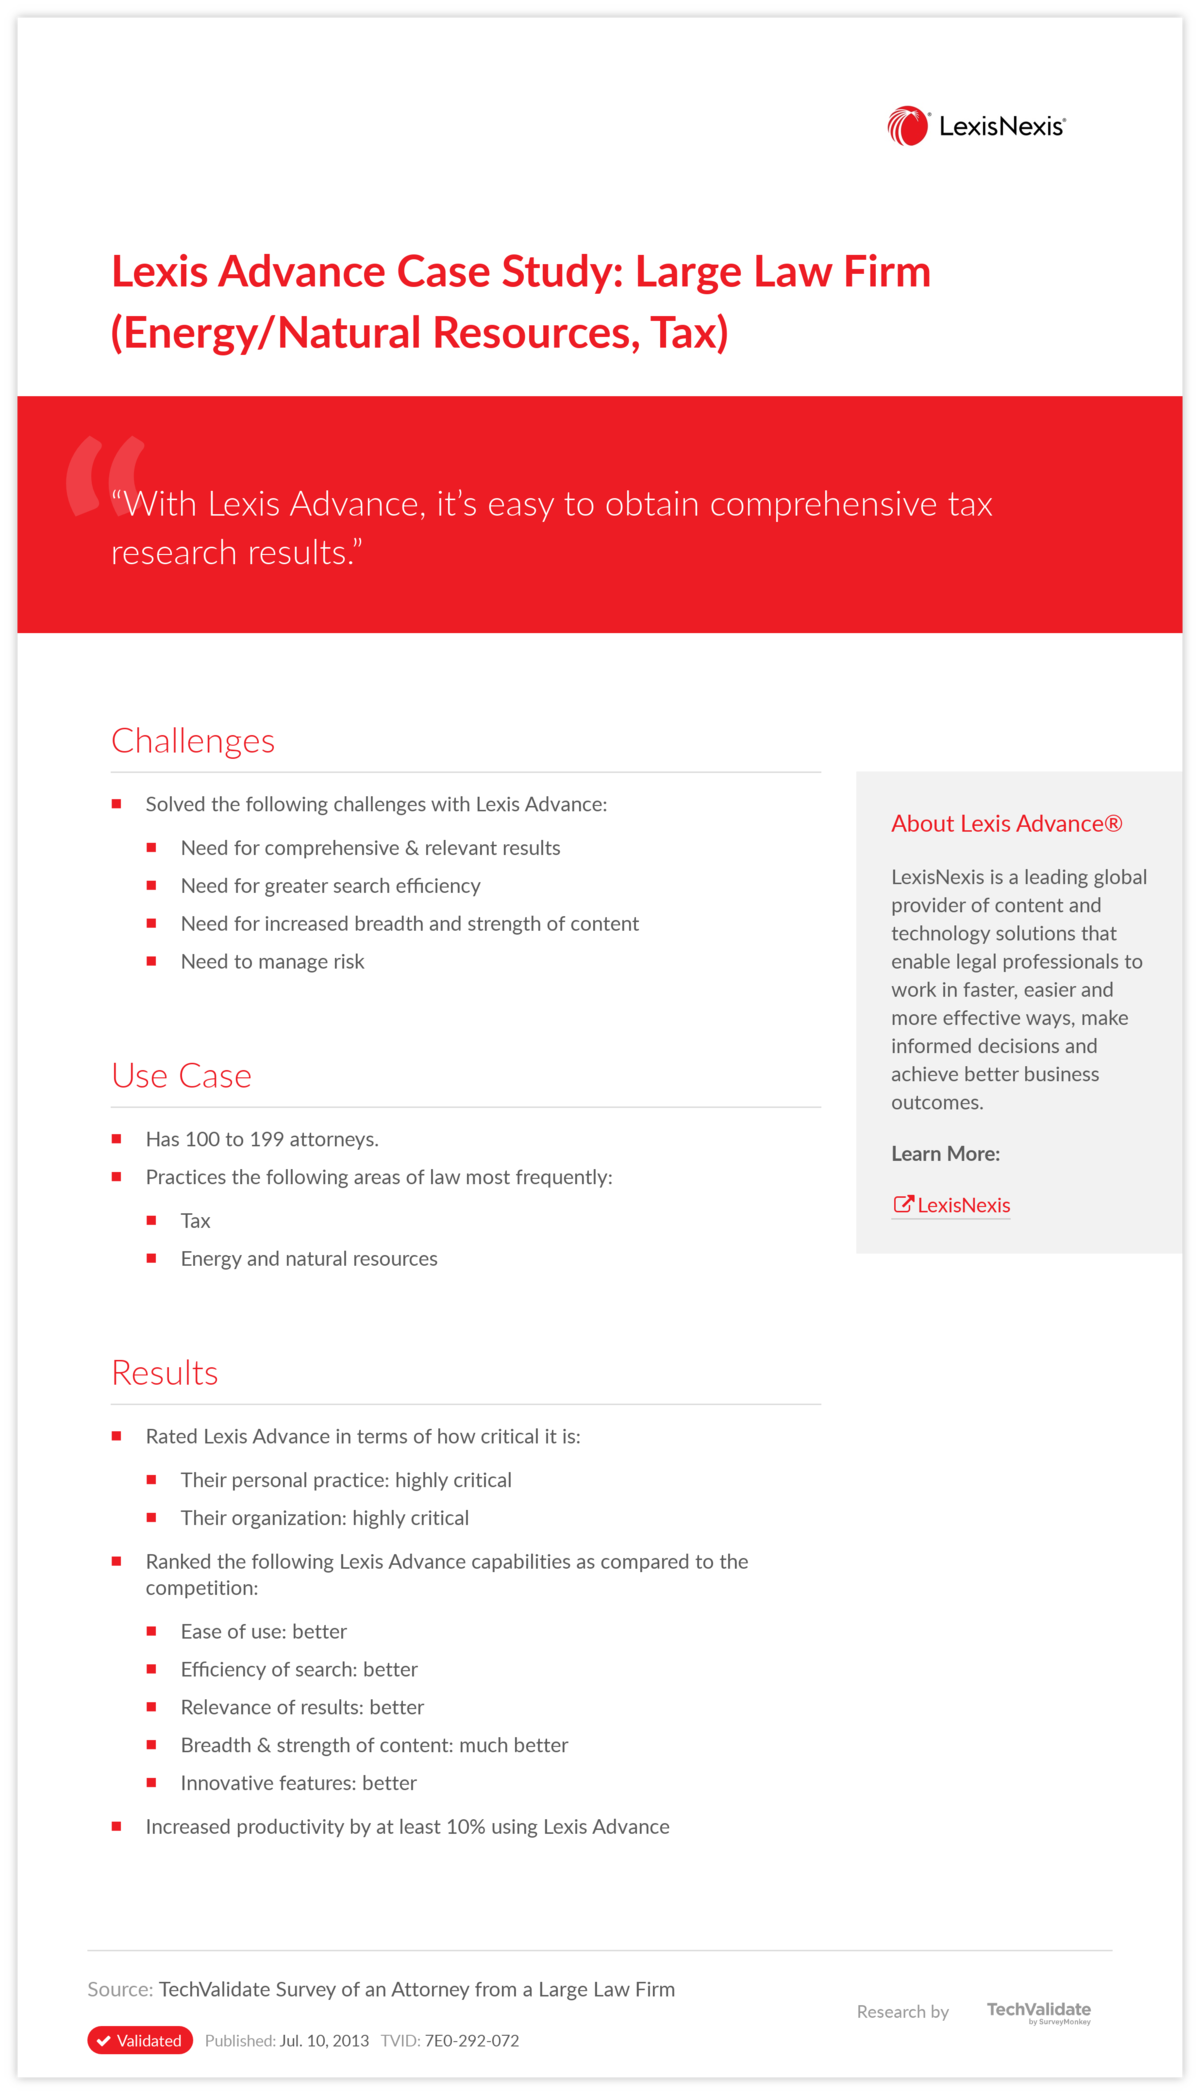 Lexis Advance Case Study: Large Law Firm (Energy/Natural Resources, Tax)